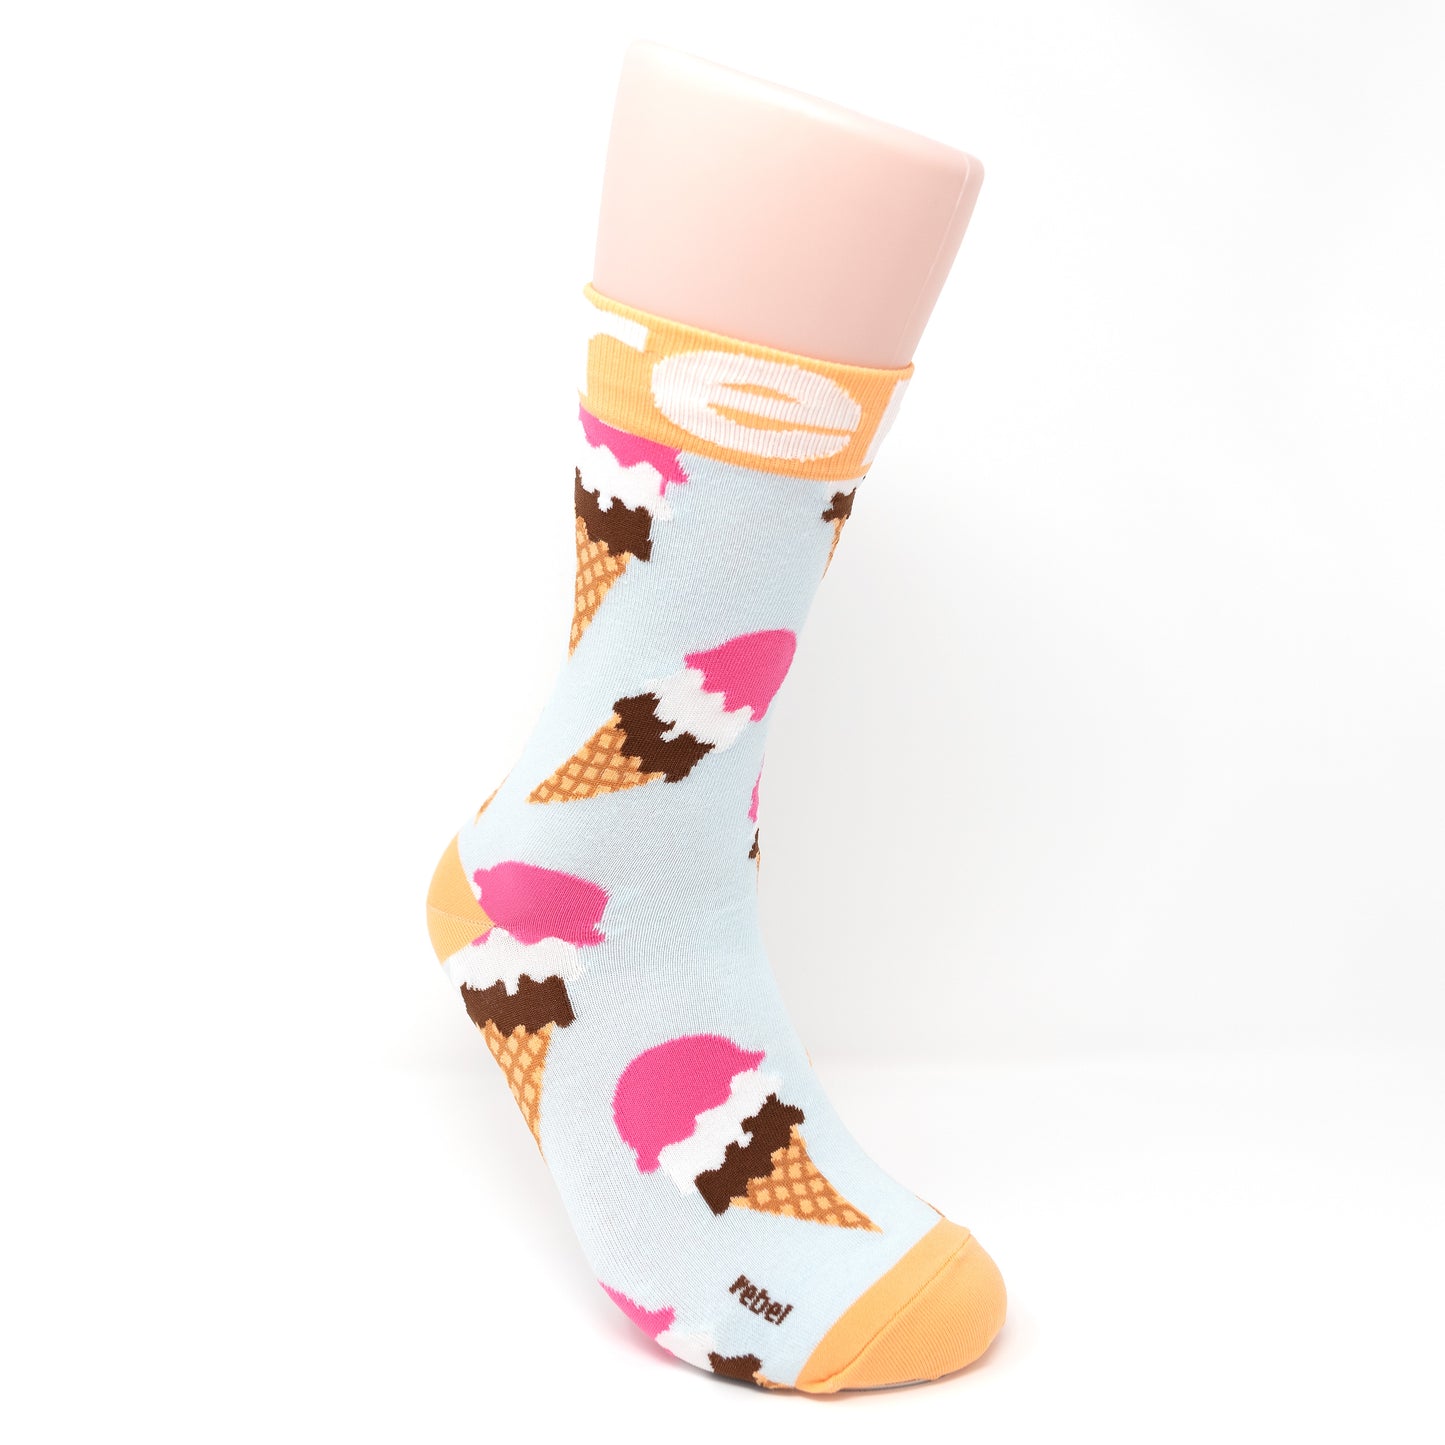 Featuring a playful and vibrant design inspired by everyone's favourite summer treat, these socks are perfect for anyone who loves to add a little fun to their wardrobe.